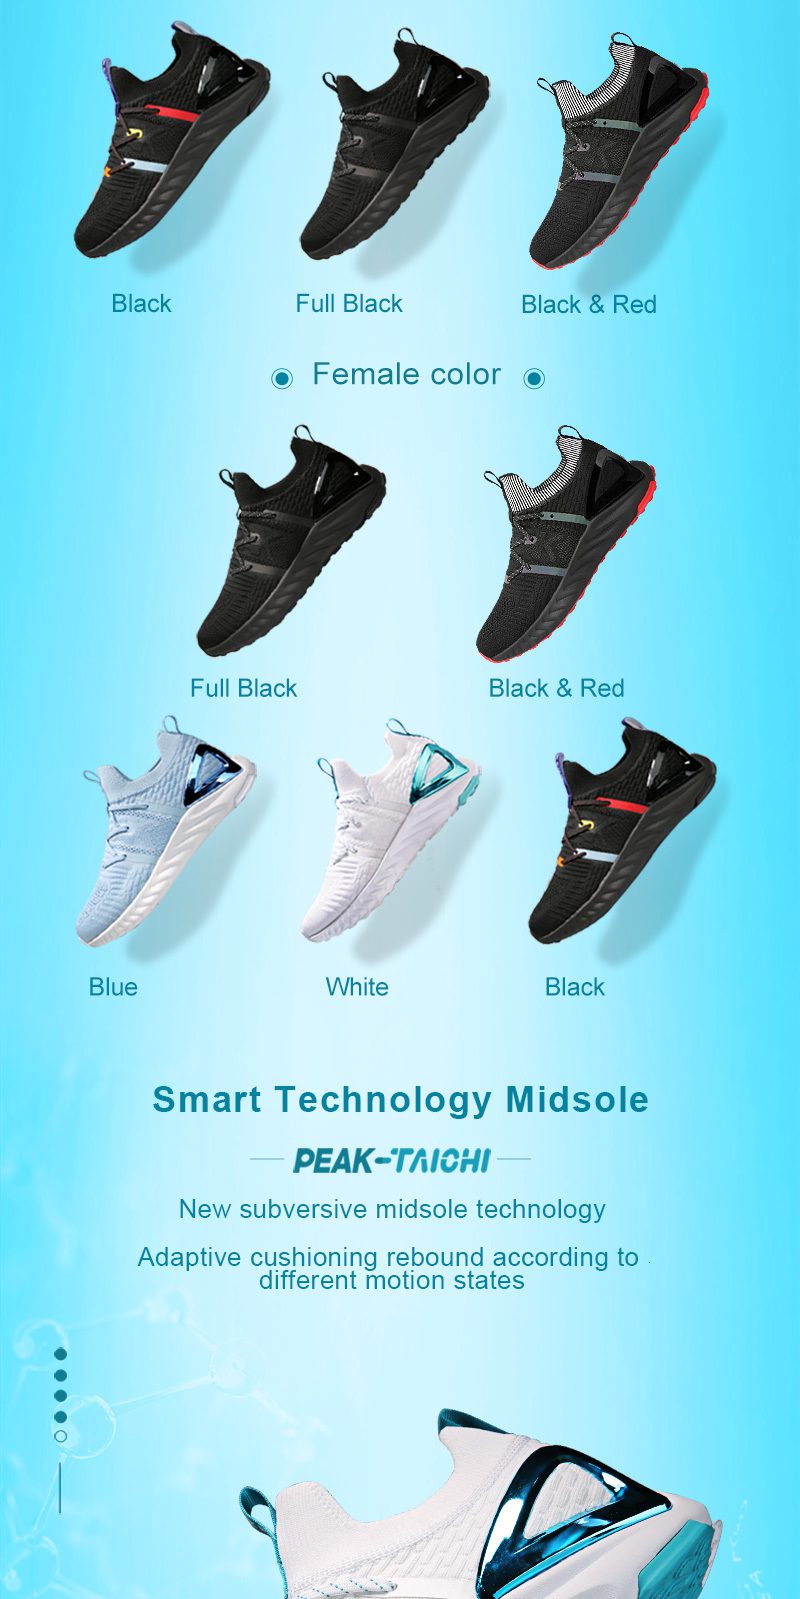 PEAK TAICHI 1.0 PLUS Men's Sneakers Male Sport Running Gym Tenis Shoes Casual Lightweight Breathable Original E92577H